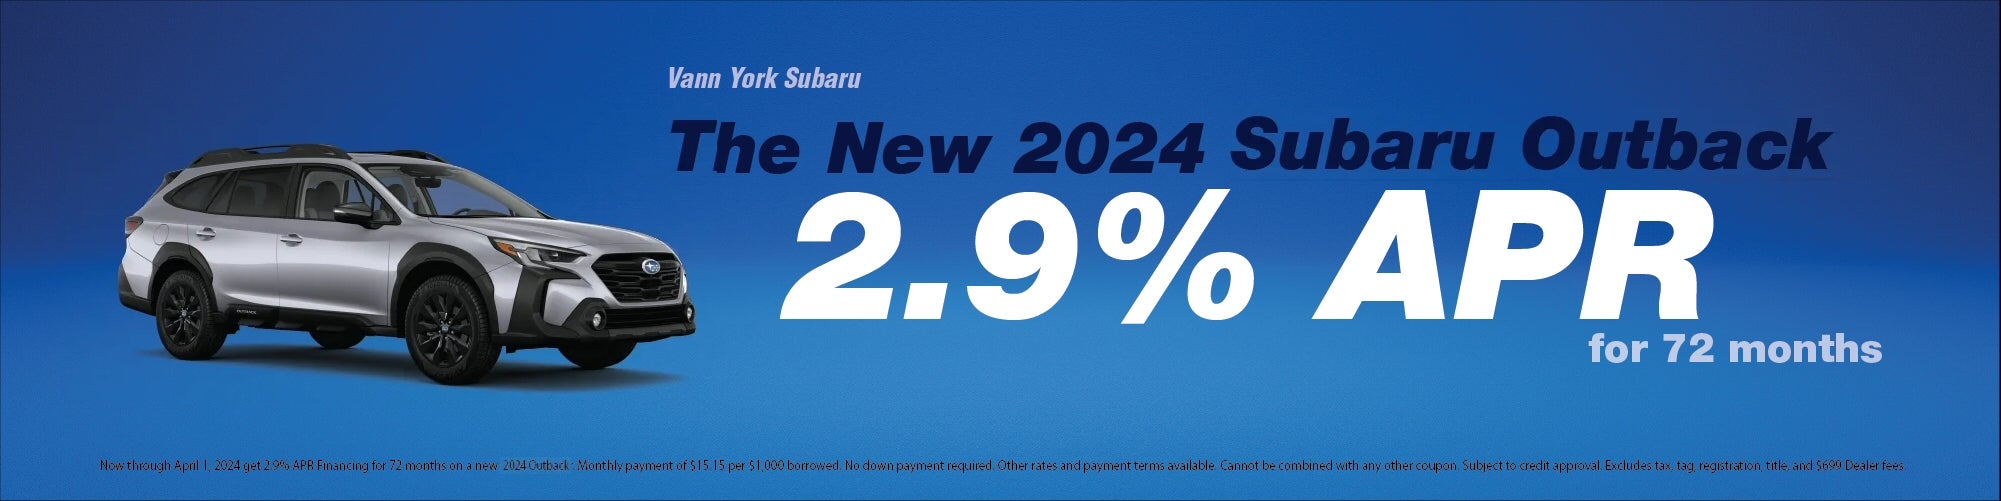 2.9% APR for 72 months on New 2024 Outback